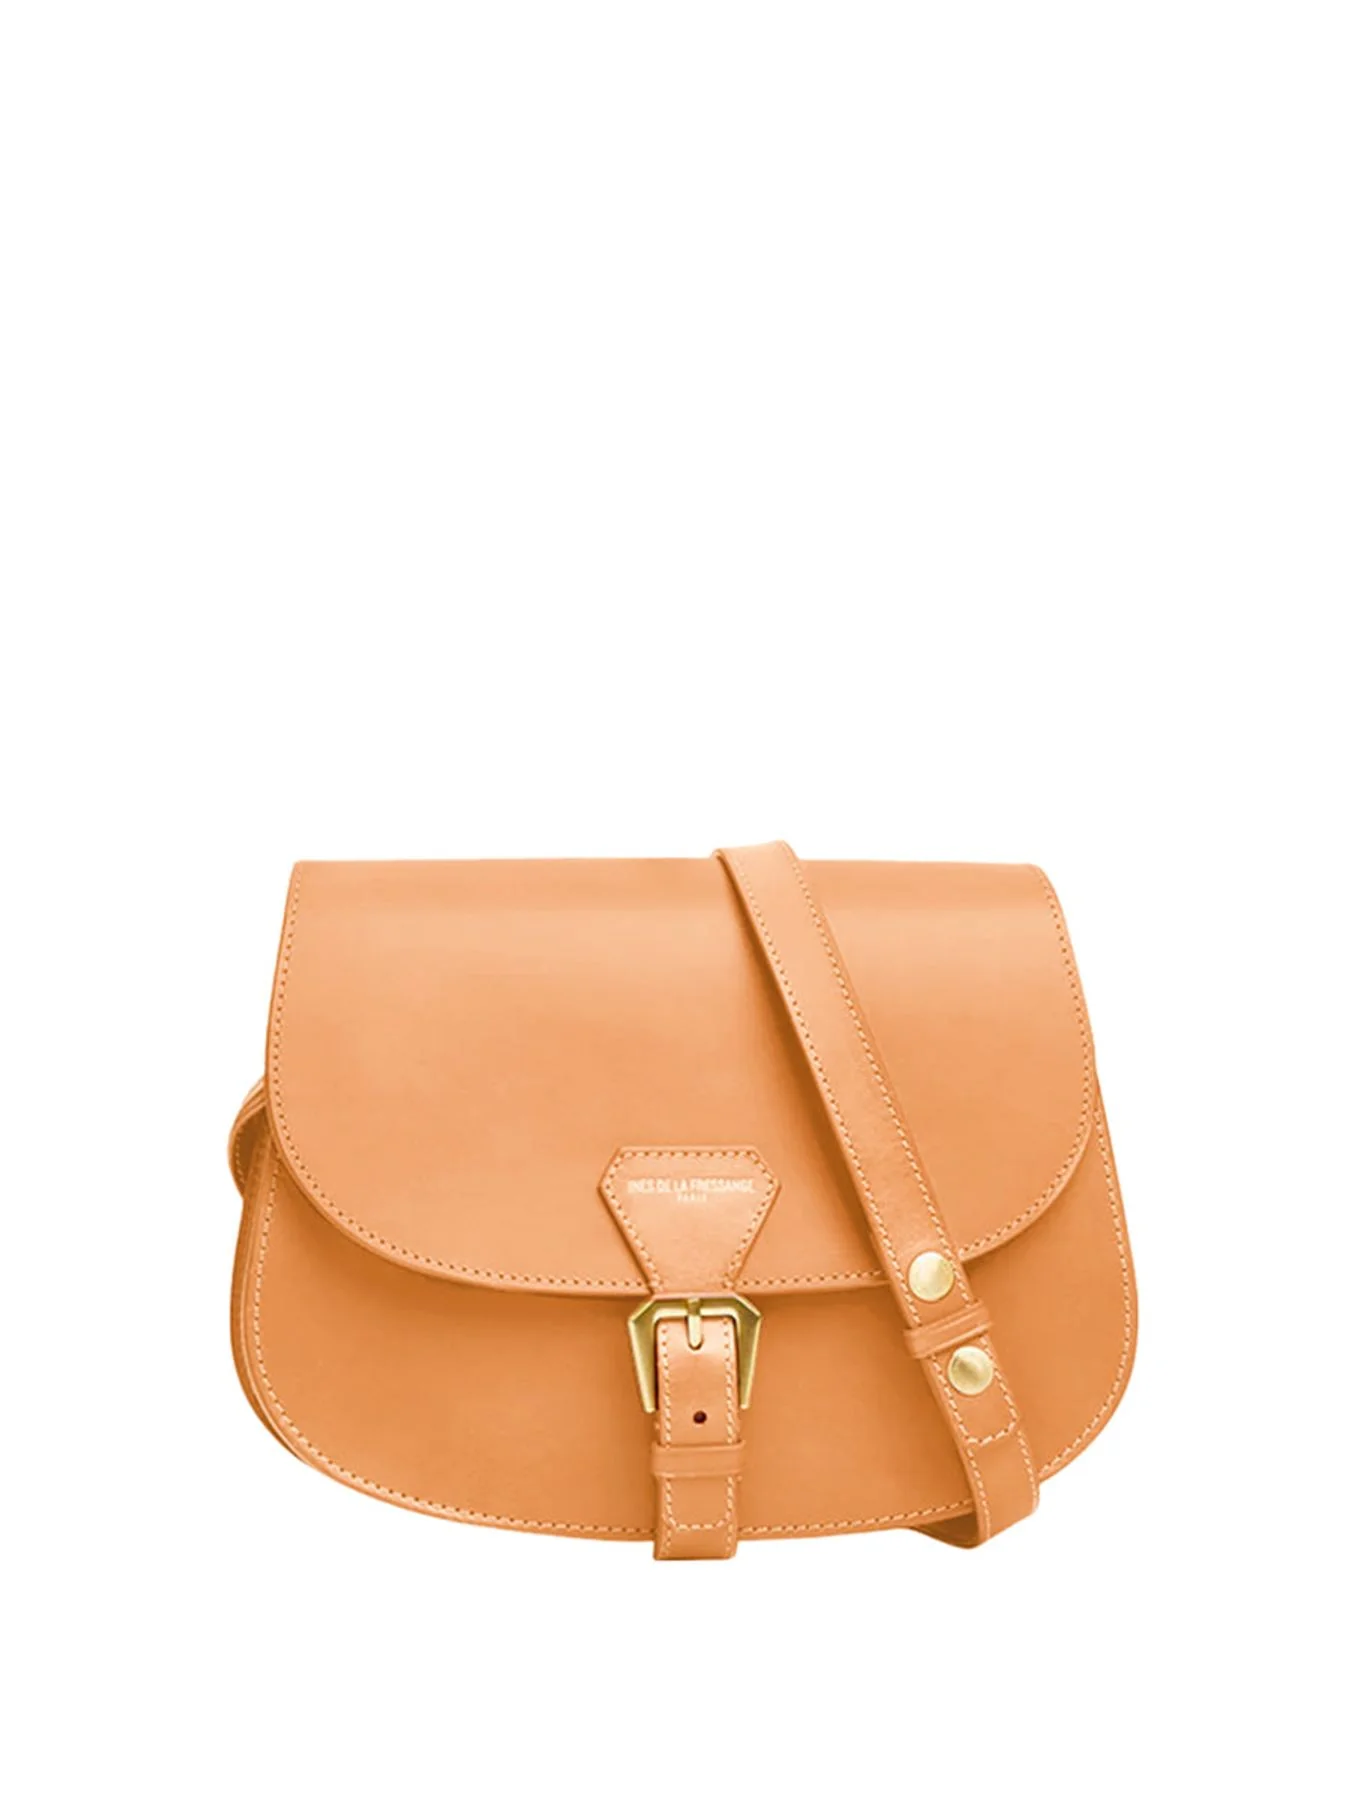 bag-leather-leather-camel